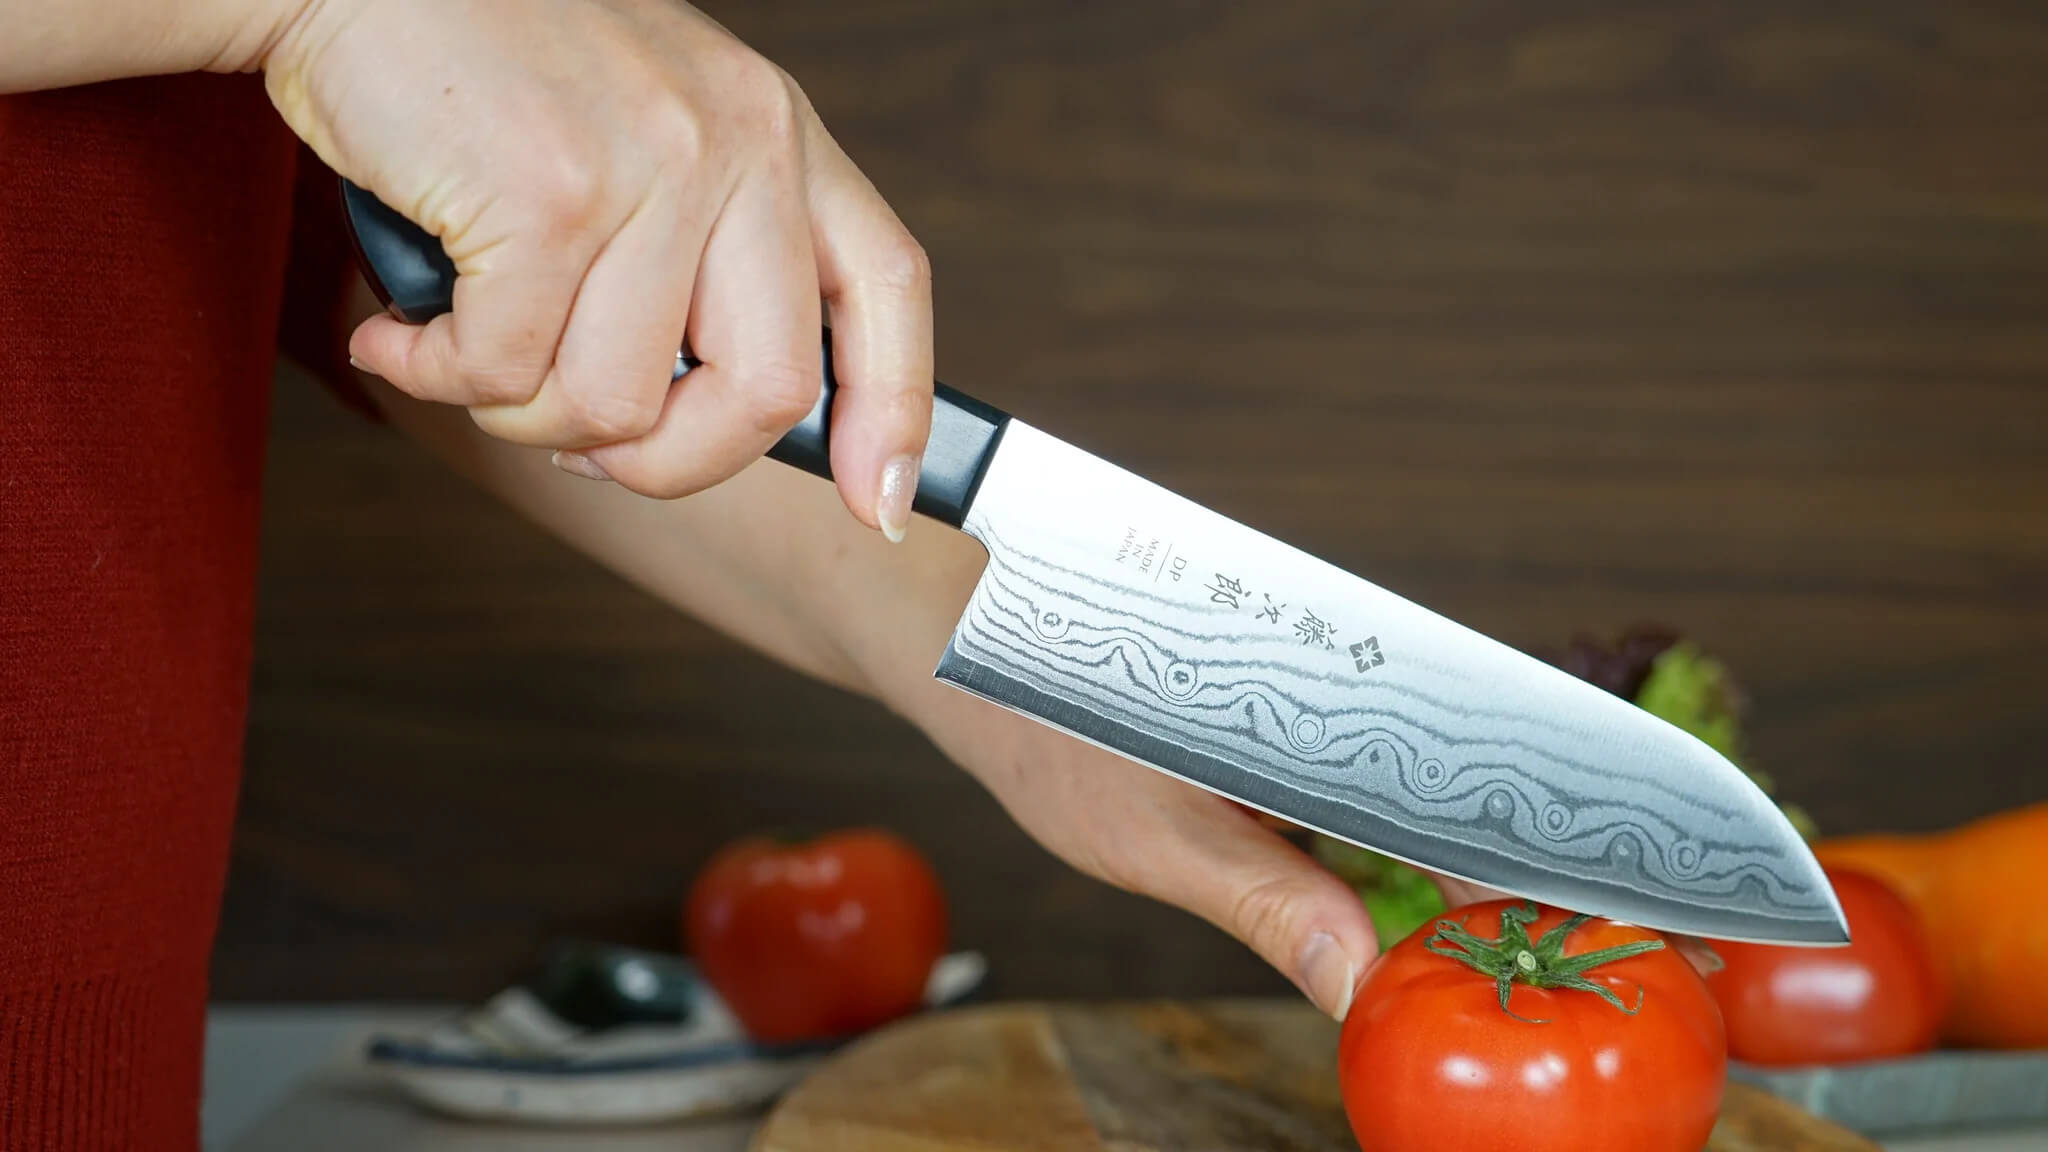 What To Look For In A Japanese Santoku Knife?